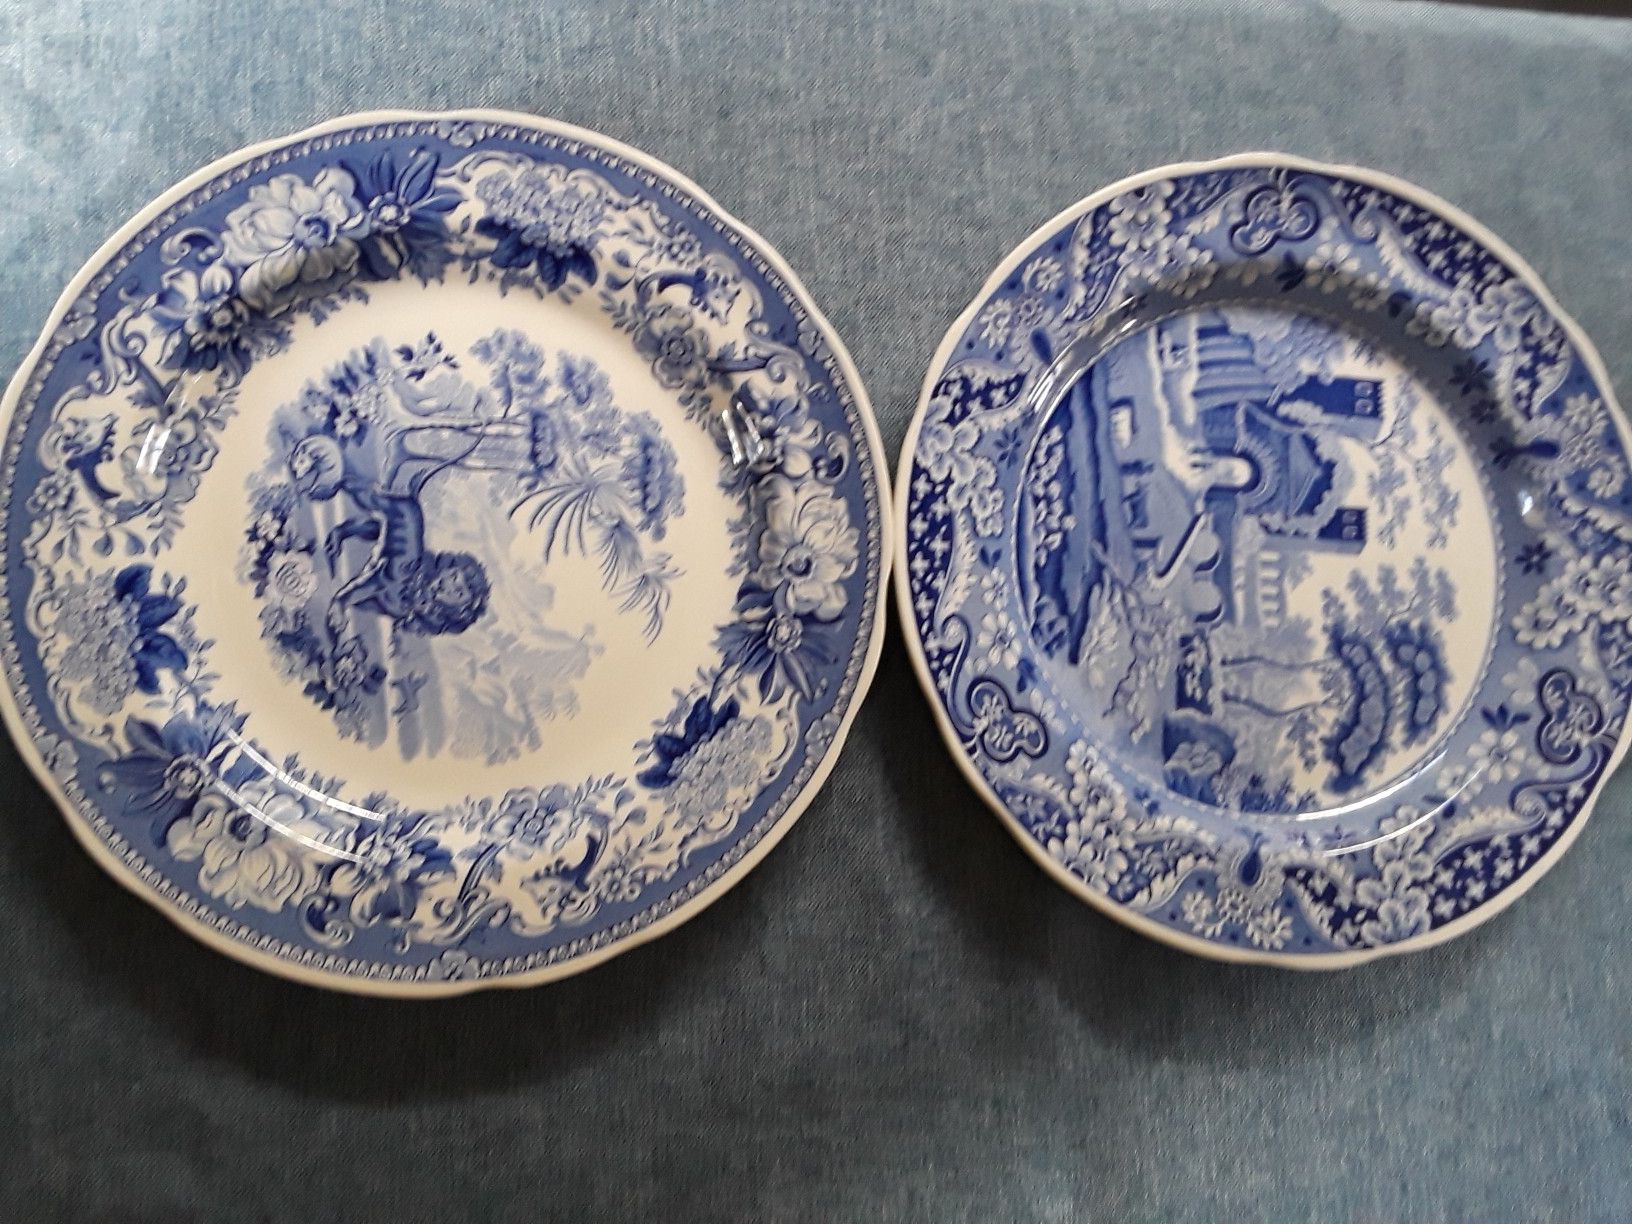 White and blue china plates